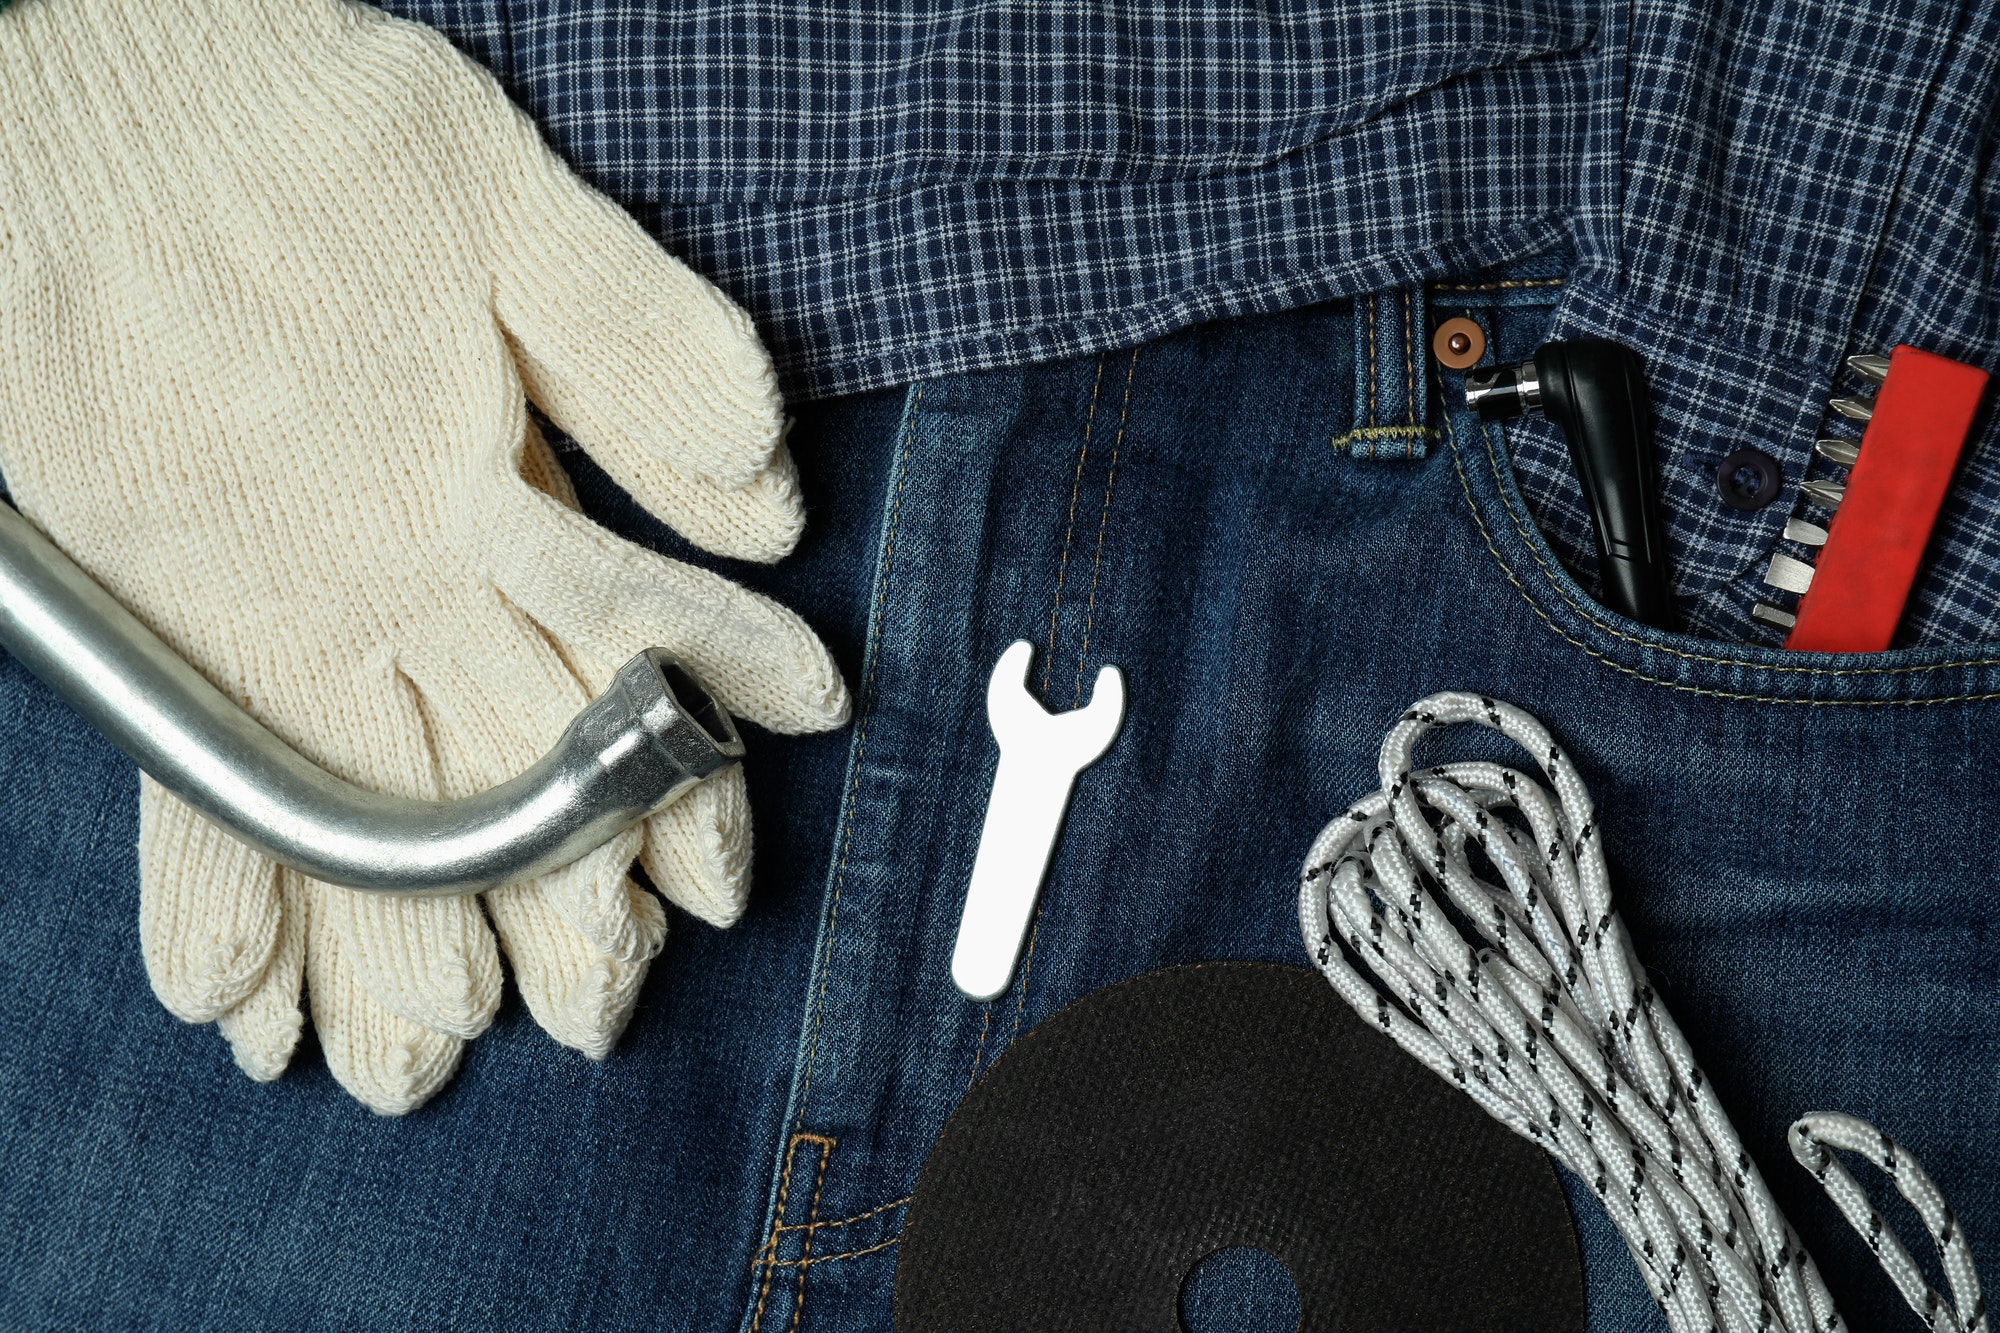 Concept of Labor Day with tools on jeans, close up